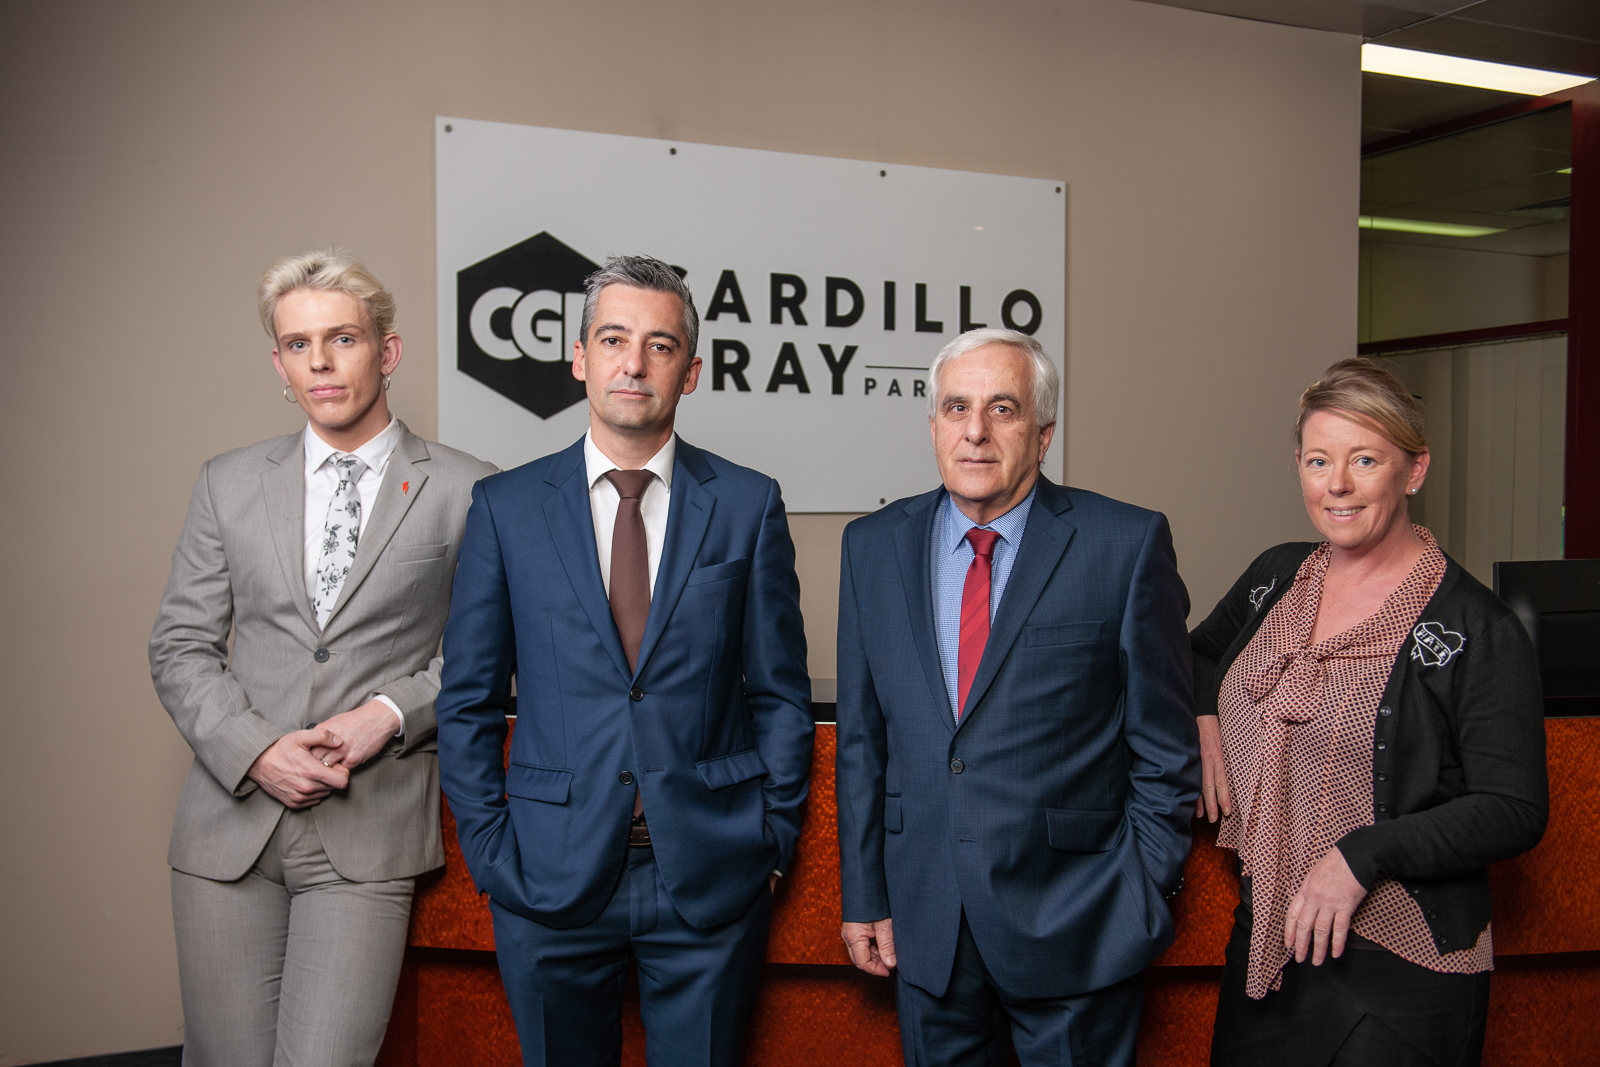 Legal Representation Based In Newcastle​, Areas of Law, Cardillo Gray Partners